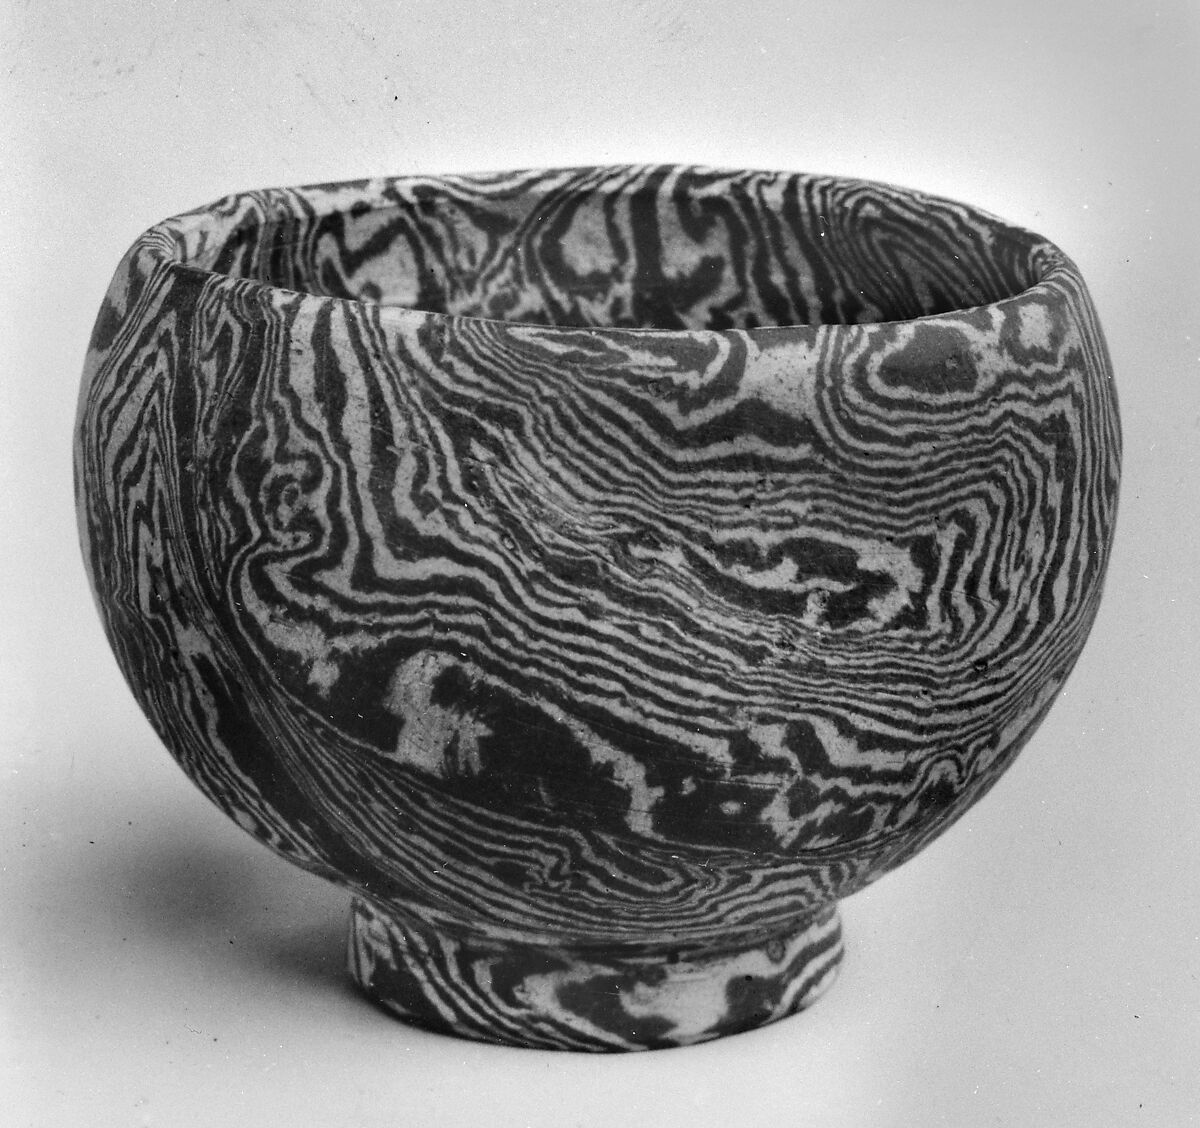 Cup, Earthenware with marblized body and brown glaze, China 